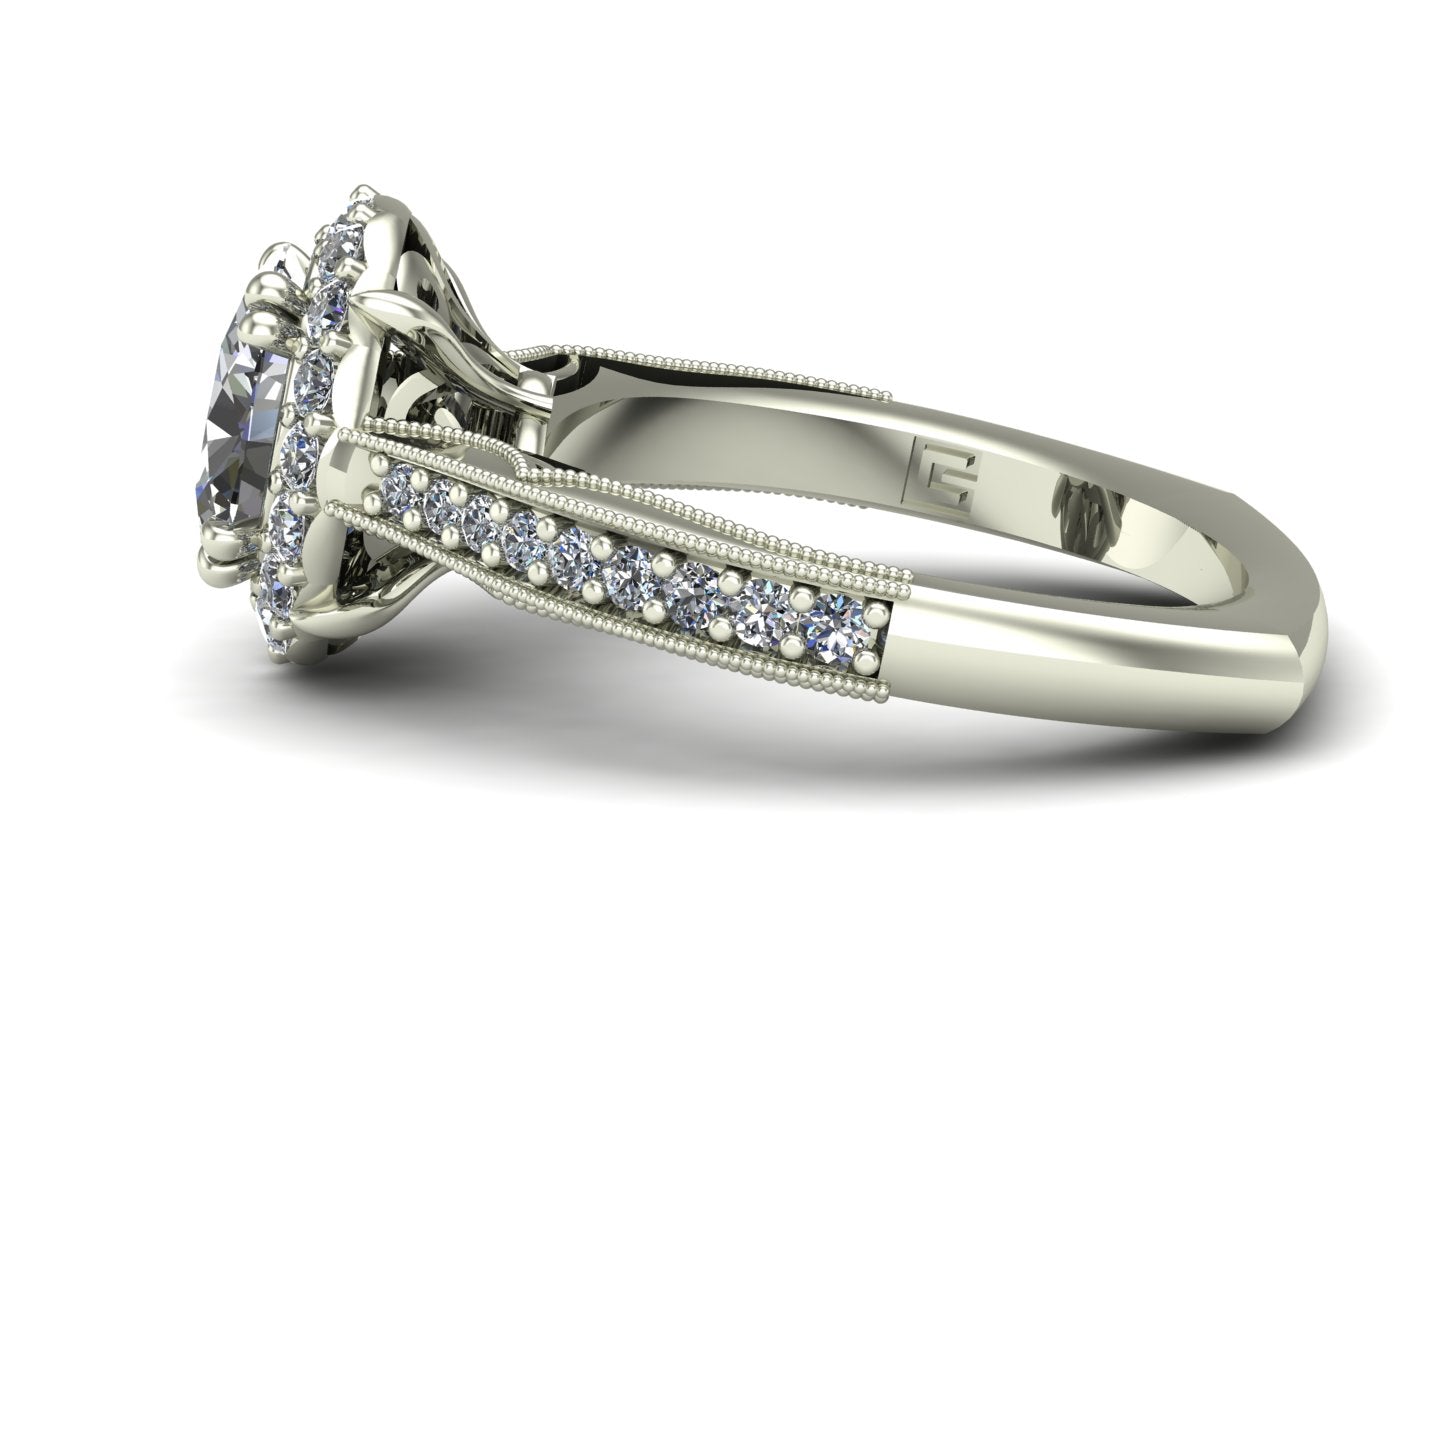 one carat oval diamond halo engagement ring in 14k white gold - Charles Babb Designs - side view